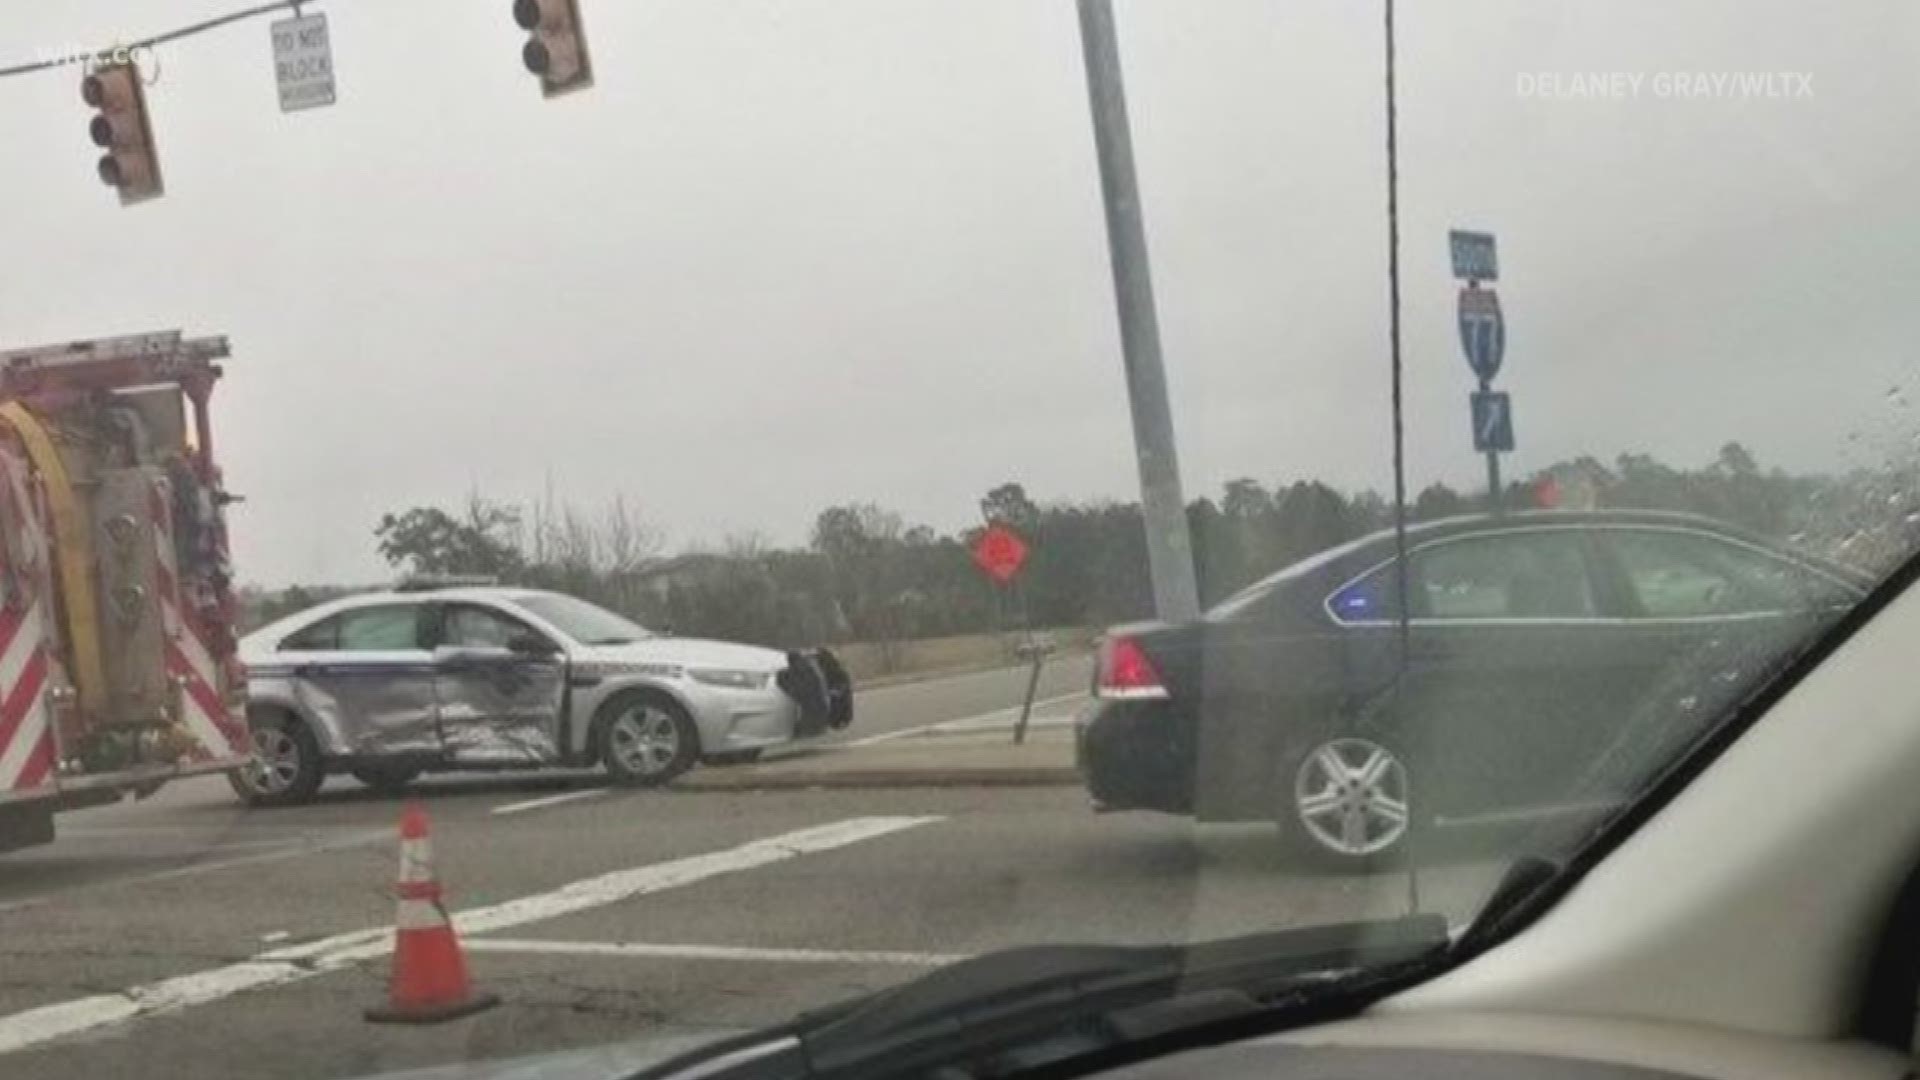 A South Carolina trooper was involved in an accident that backed up traffic on Forest Drive on Sunday.